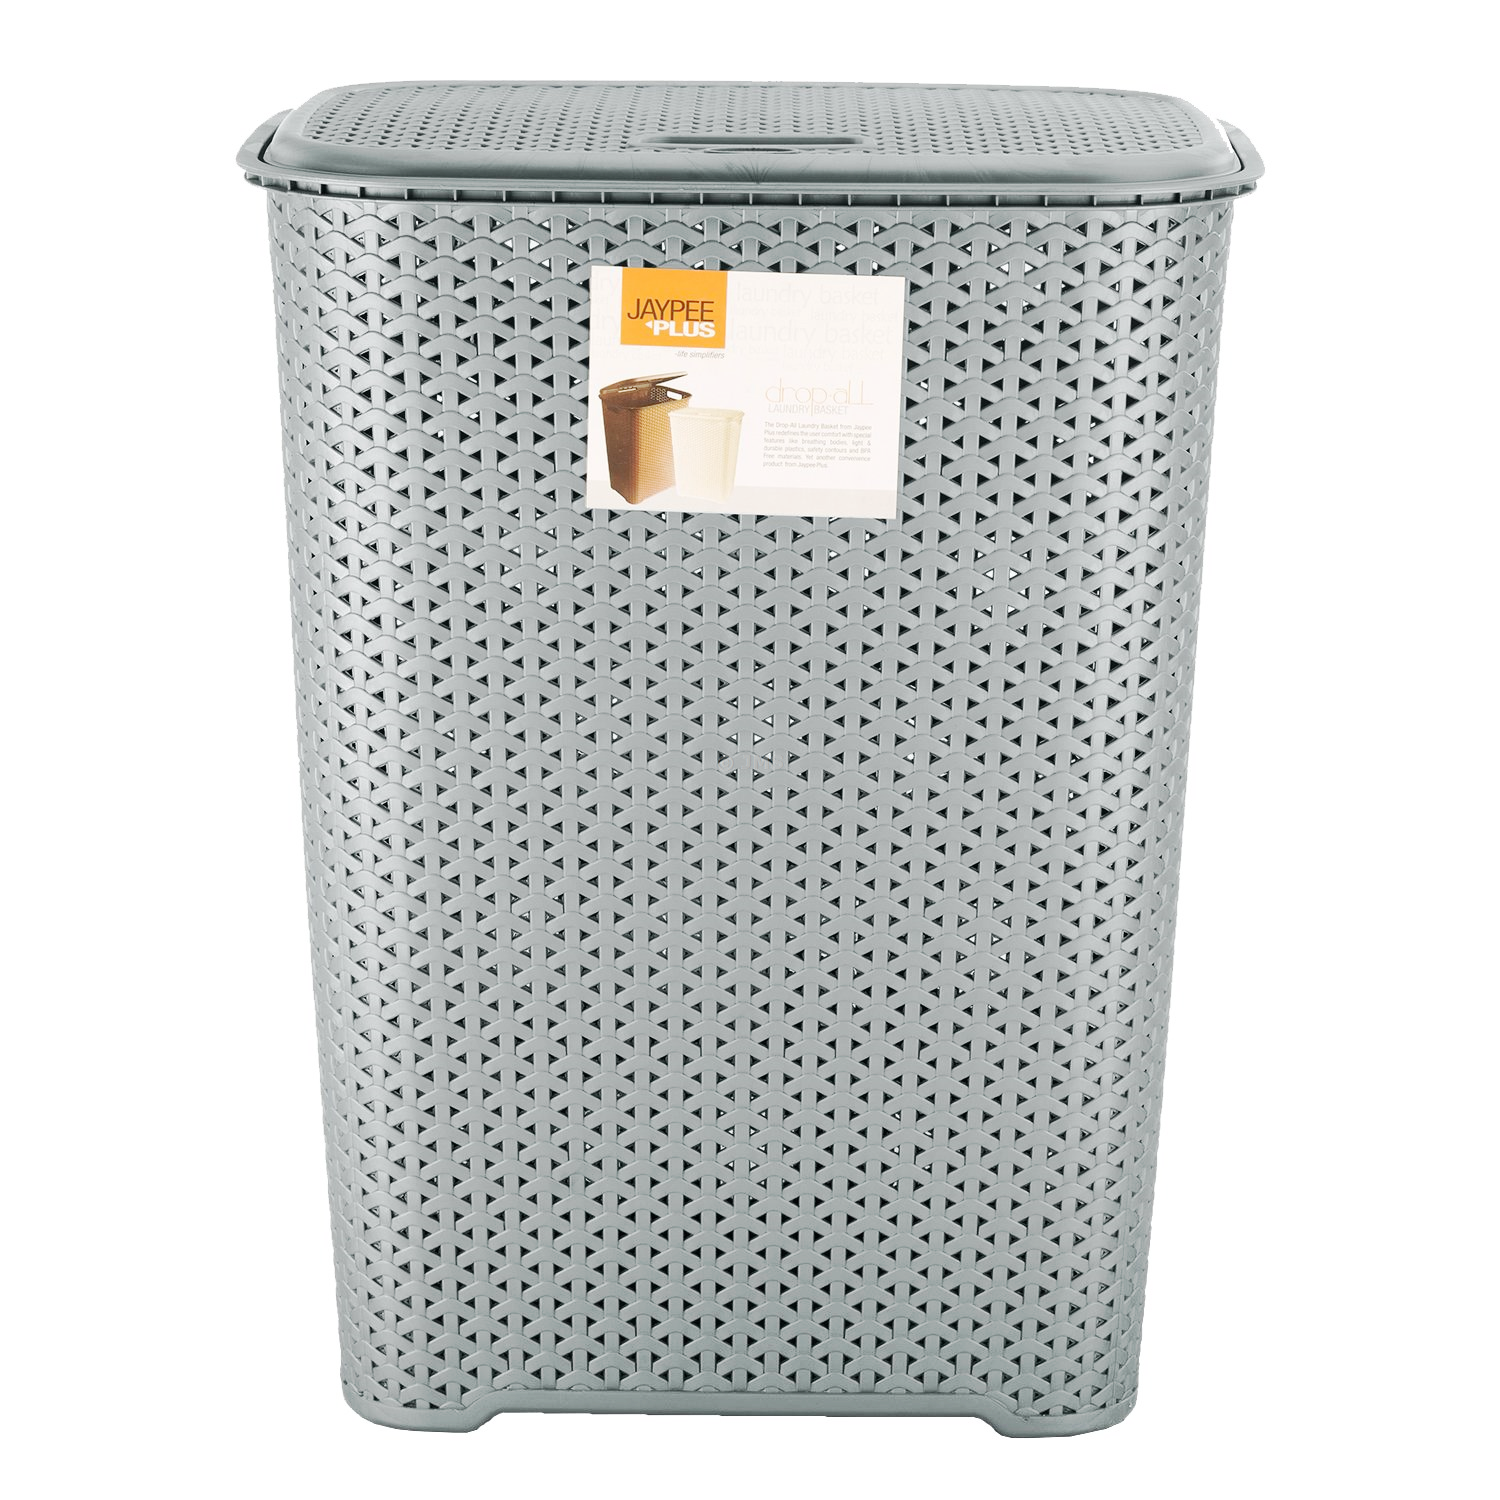 Drop All 65L Large Plastic Laundry Basket with Lid Washing Dirty Clothes Storage Linen Bin Tidy - Silver